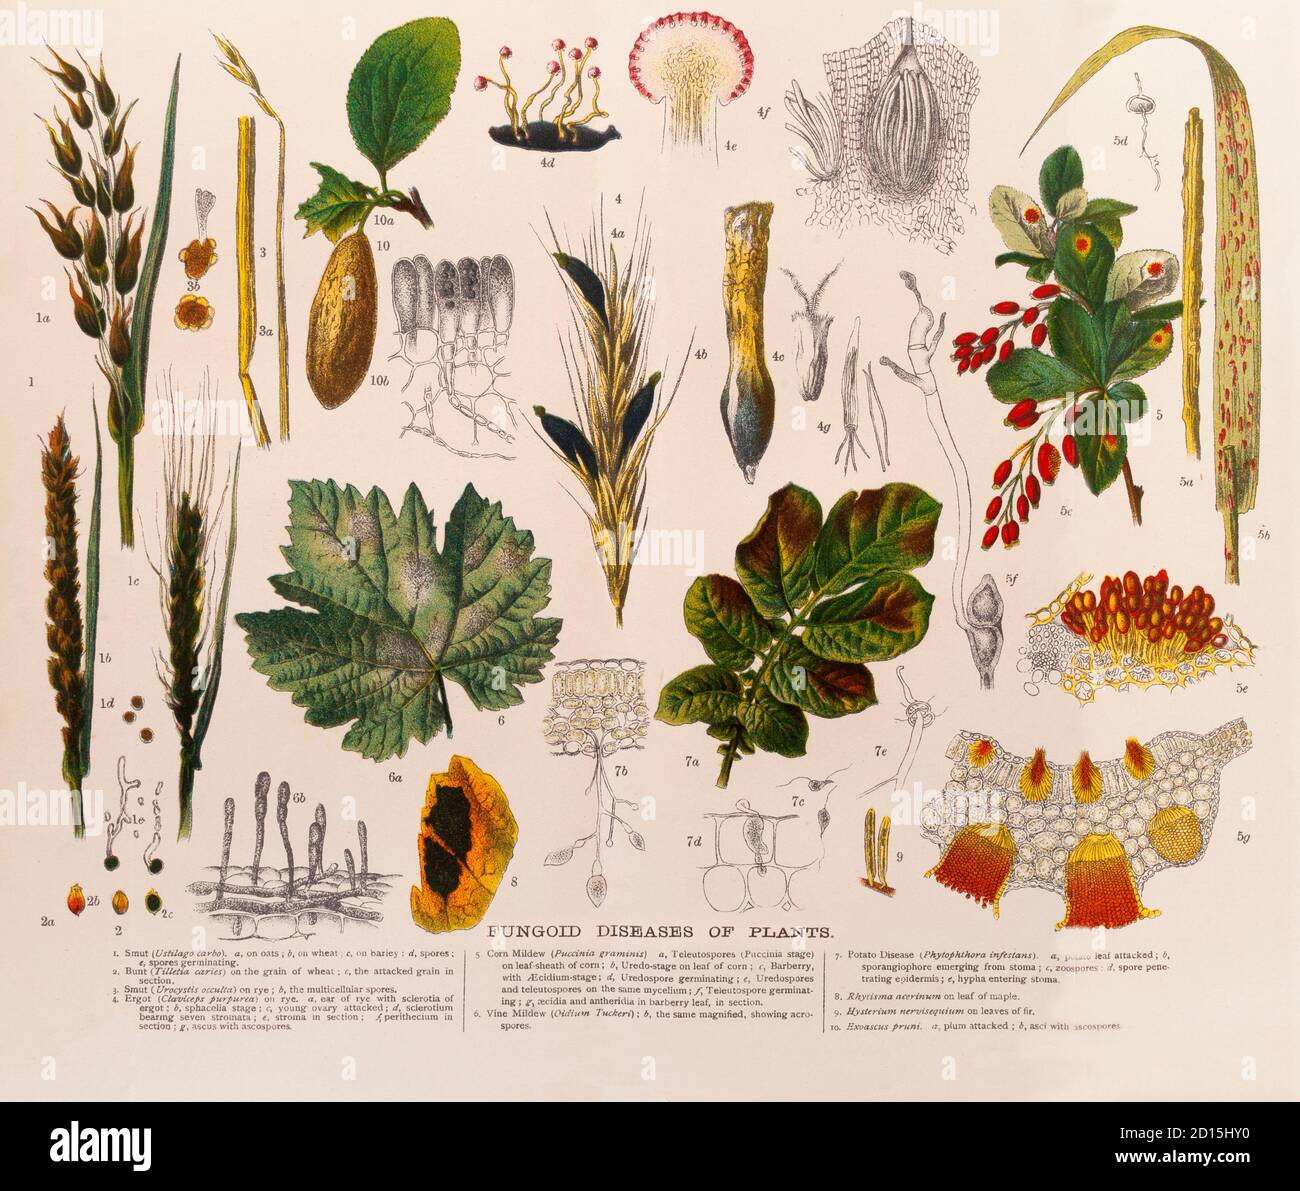 A late 19th Century chart illustrating various types of plant fungoid diseases, Collectively, fungi and fungal-like organisms (FLOs) cause more plant diseases than any other group of plant pest with over 8,000 species shown to cause disease. Fungi and FLOs are eukaryotic organisms that lack chlorophyll and thus do not have the ability to photosynthesize their own food. They obtain nutrients by absorption through tiny thread-like filaments called hyphae that branch in all directions throughout a substrate. A collection of hyphae is referred to as mycelium (pl., mycelia) and Mycelia are the key Stock Photo